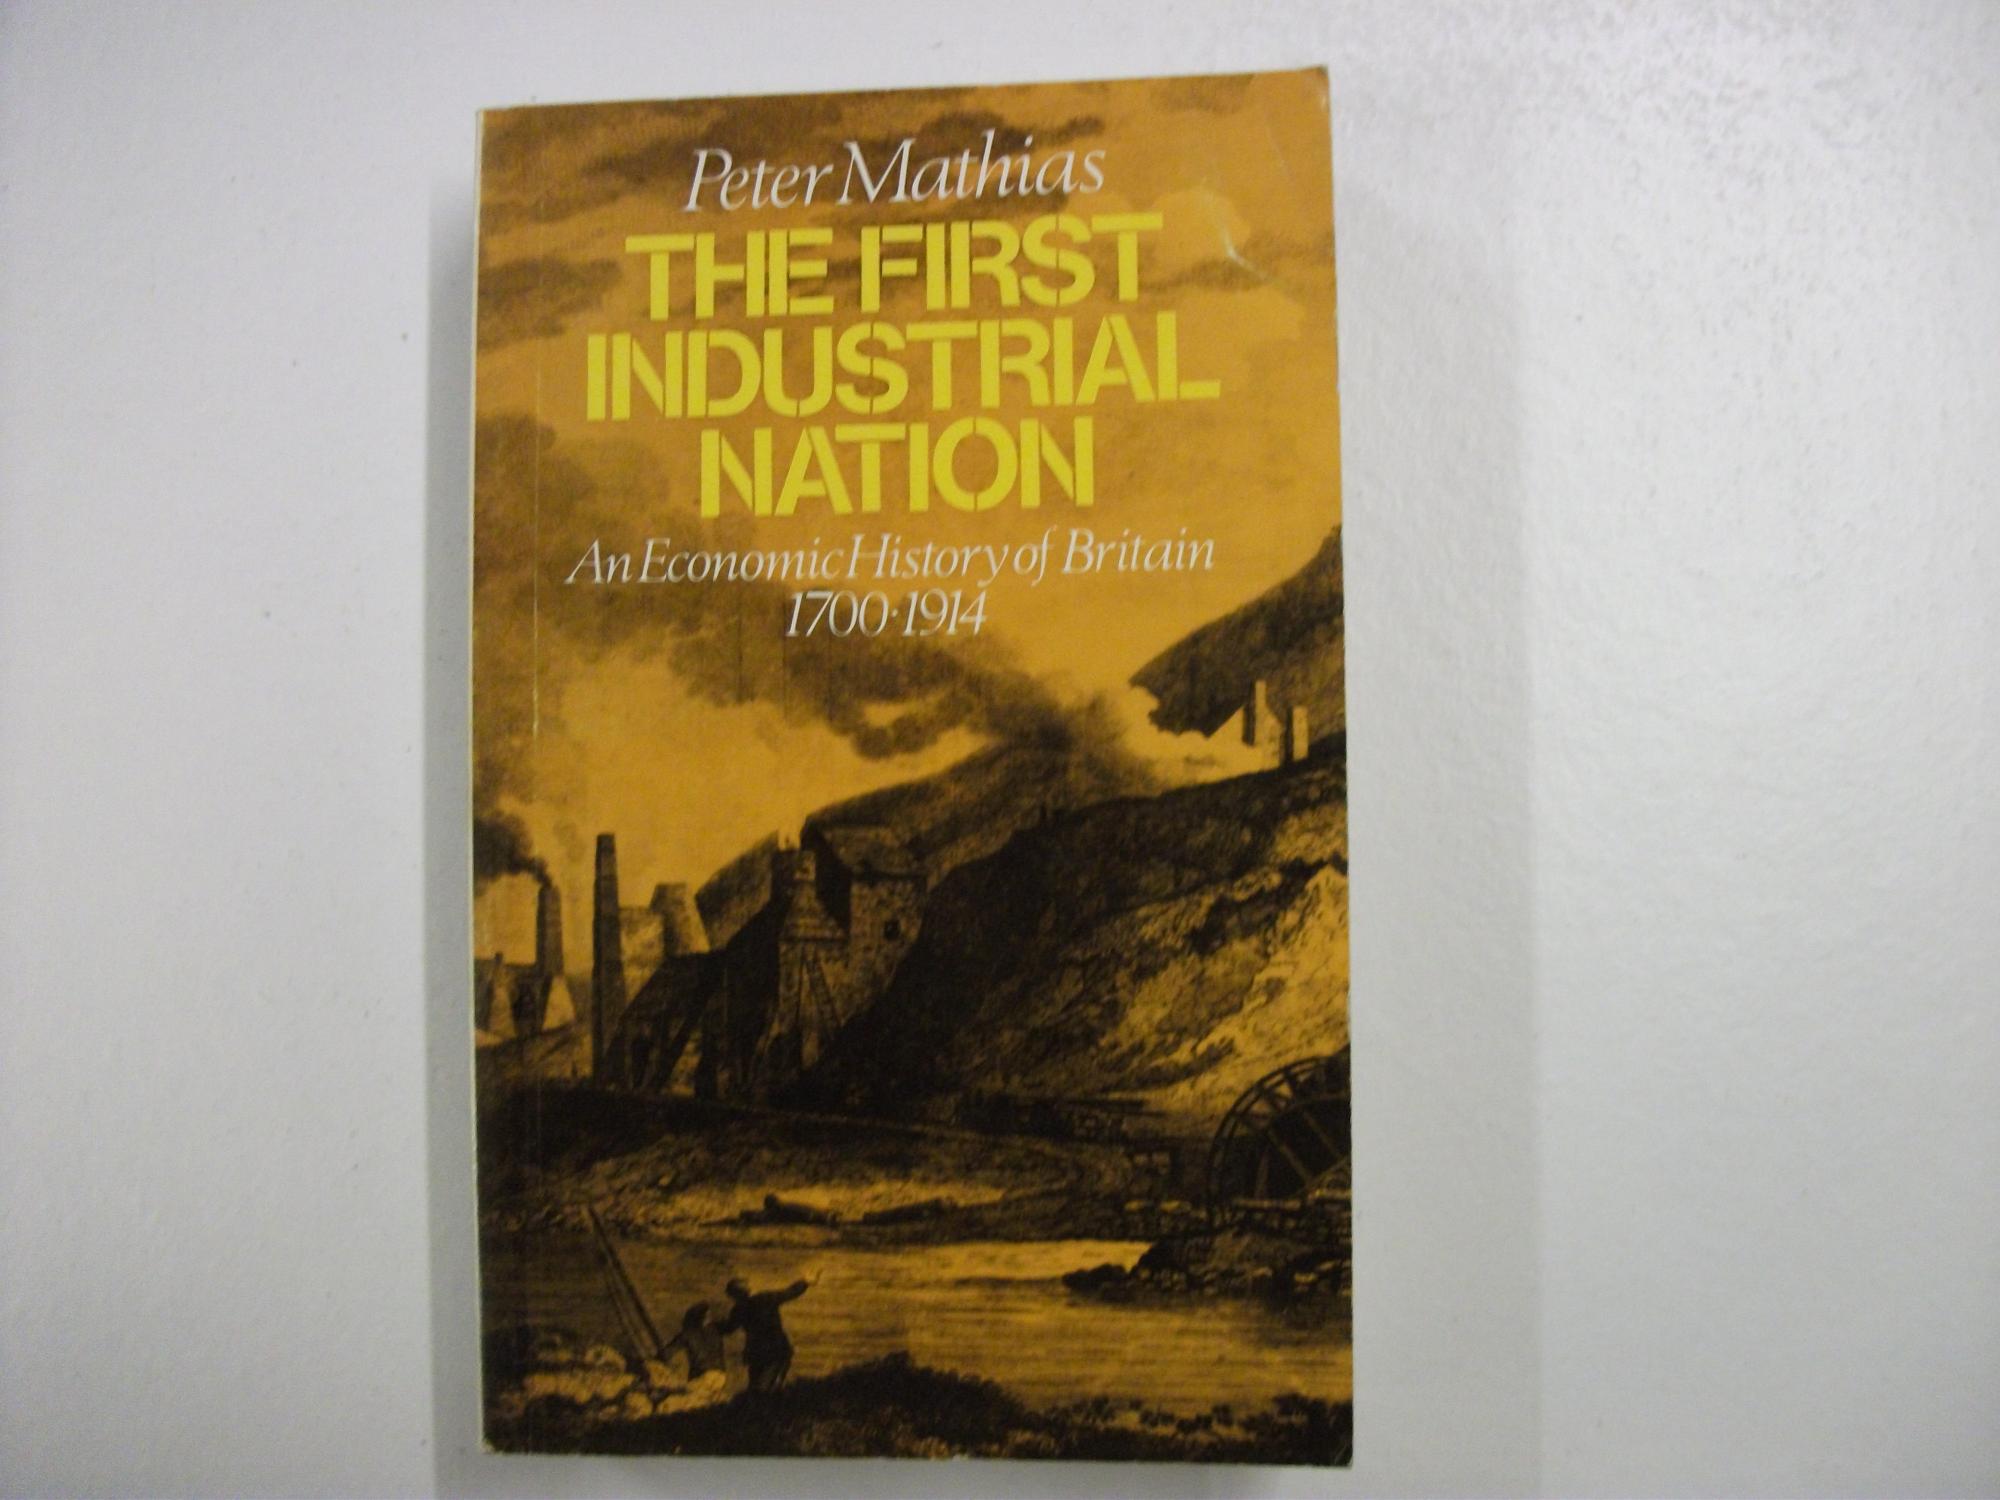 The First Industrial Nation. An Economic History of Britain, 1700 - 1914.